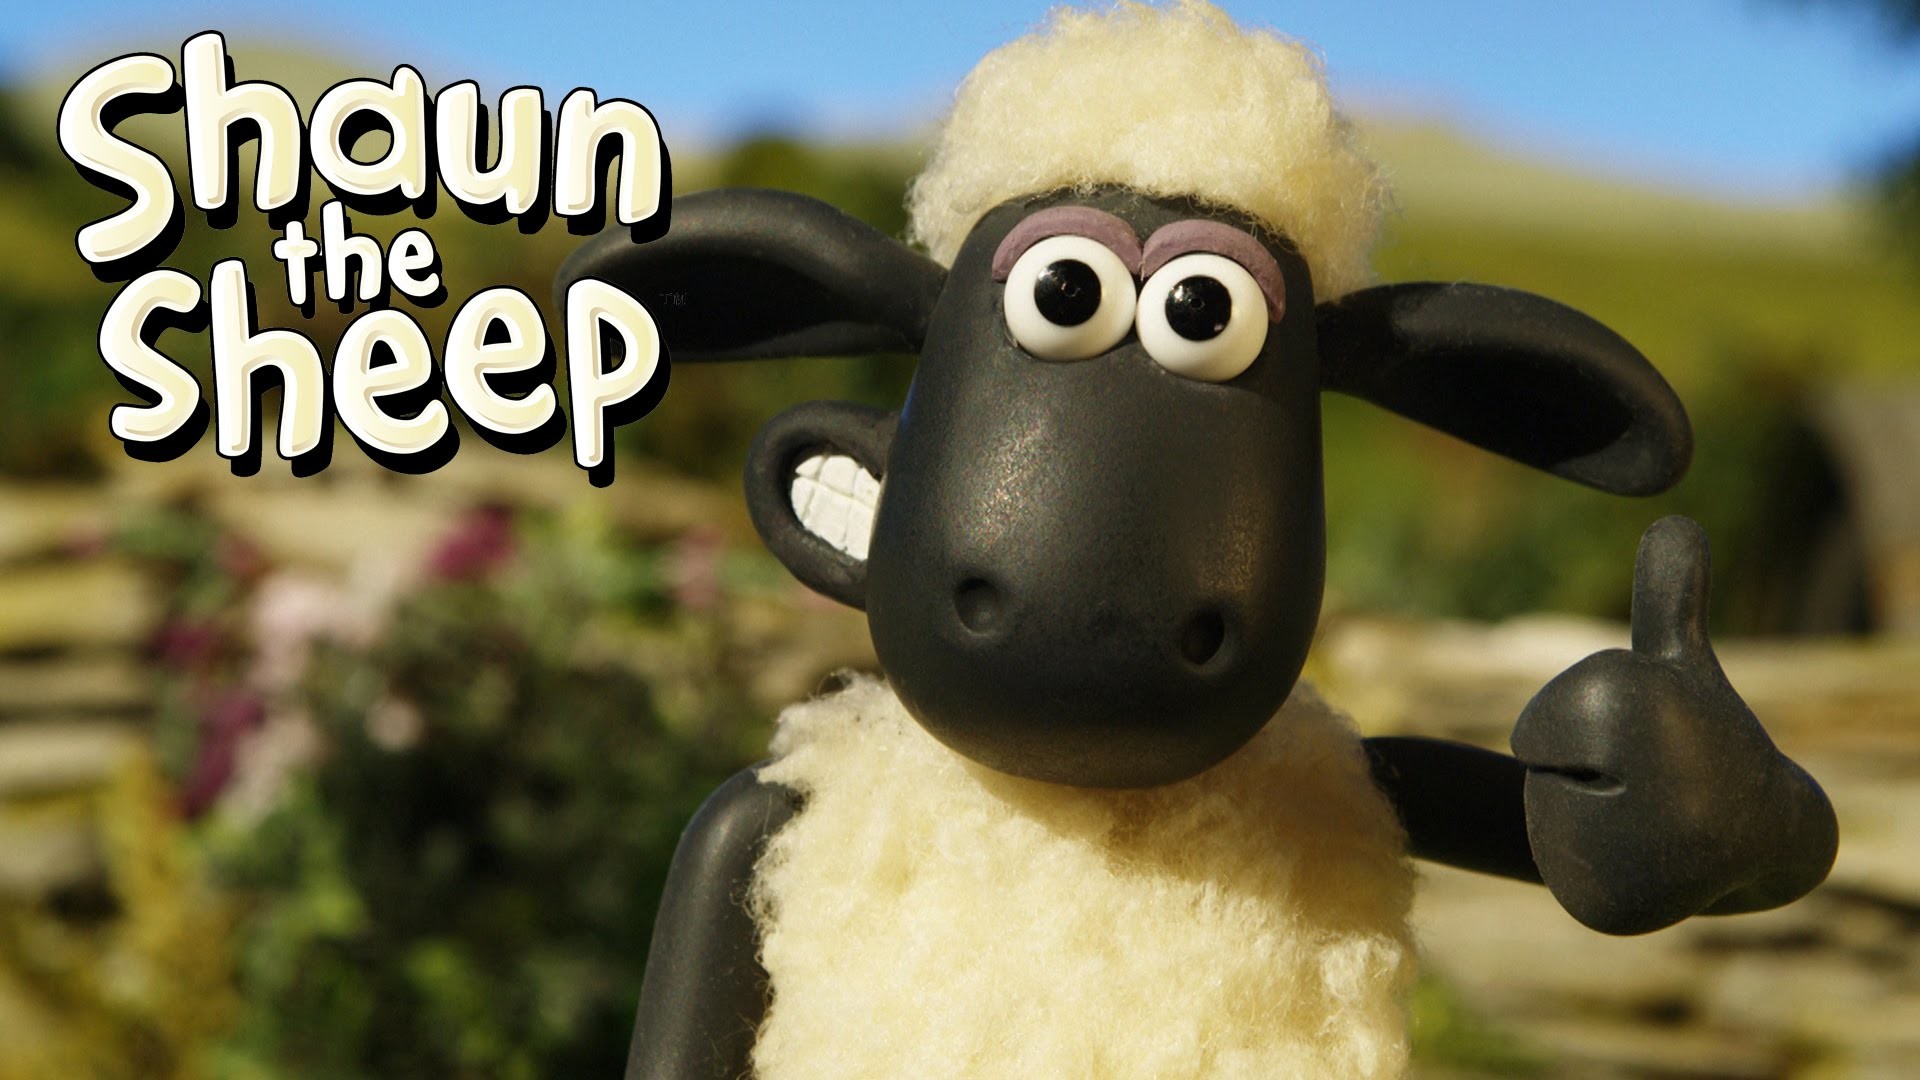 1920x1080 Shaun the Sheep | Voted UK's Best Loved Children's BBC TV Character!